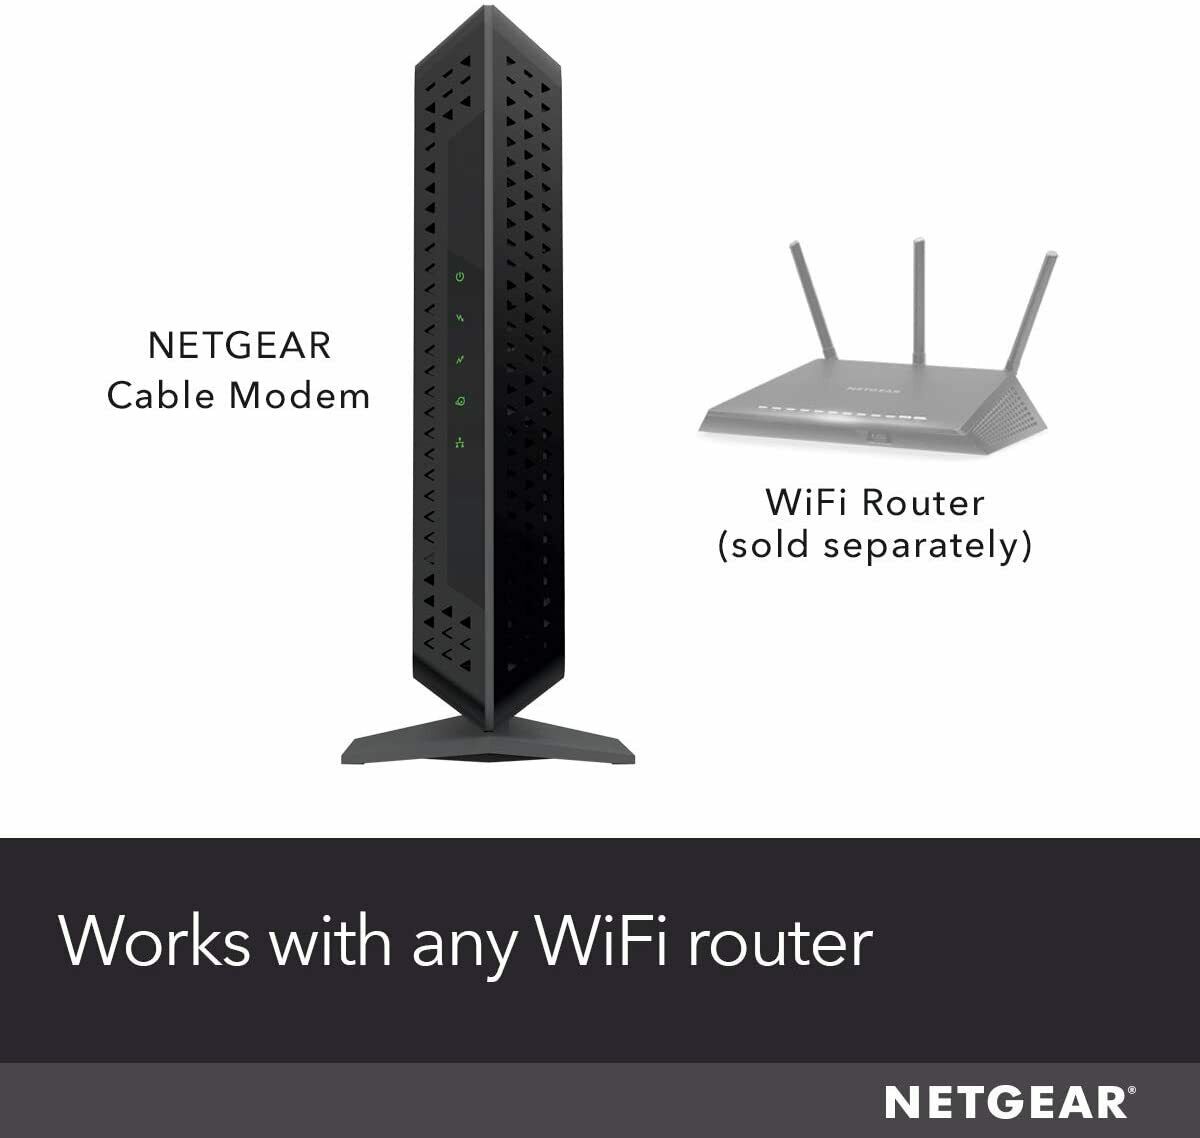 NETGEAR CM600-1AZNAS-USED High Speed 960Mbps DOCSIS 3.0 24x8 Cable Modem - Used